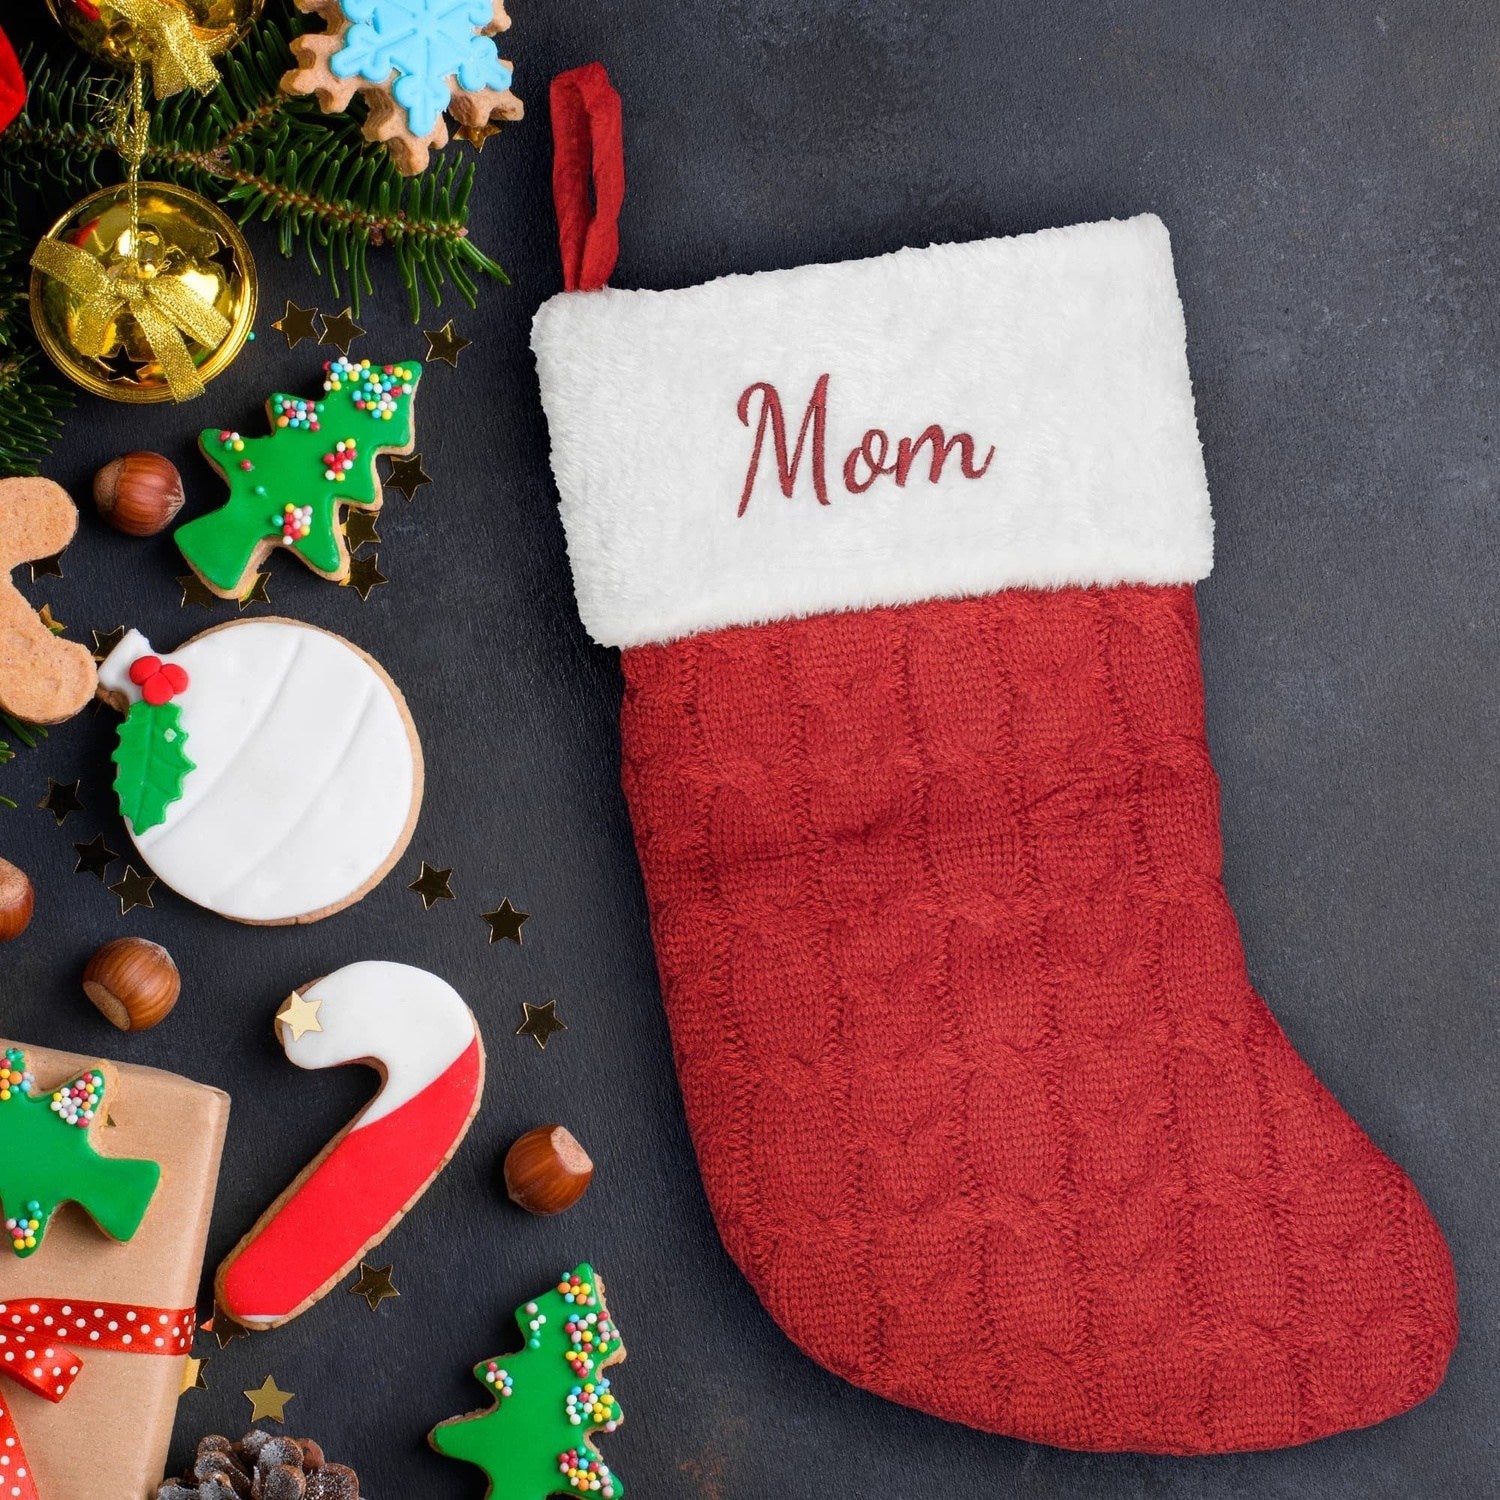 Embroidered Christmas Stocking Personalized